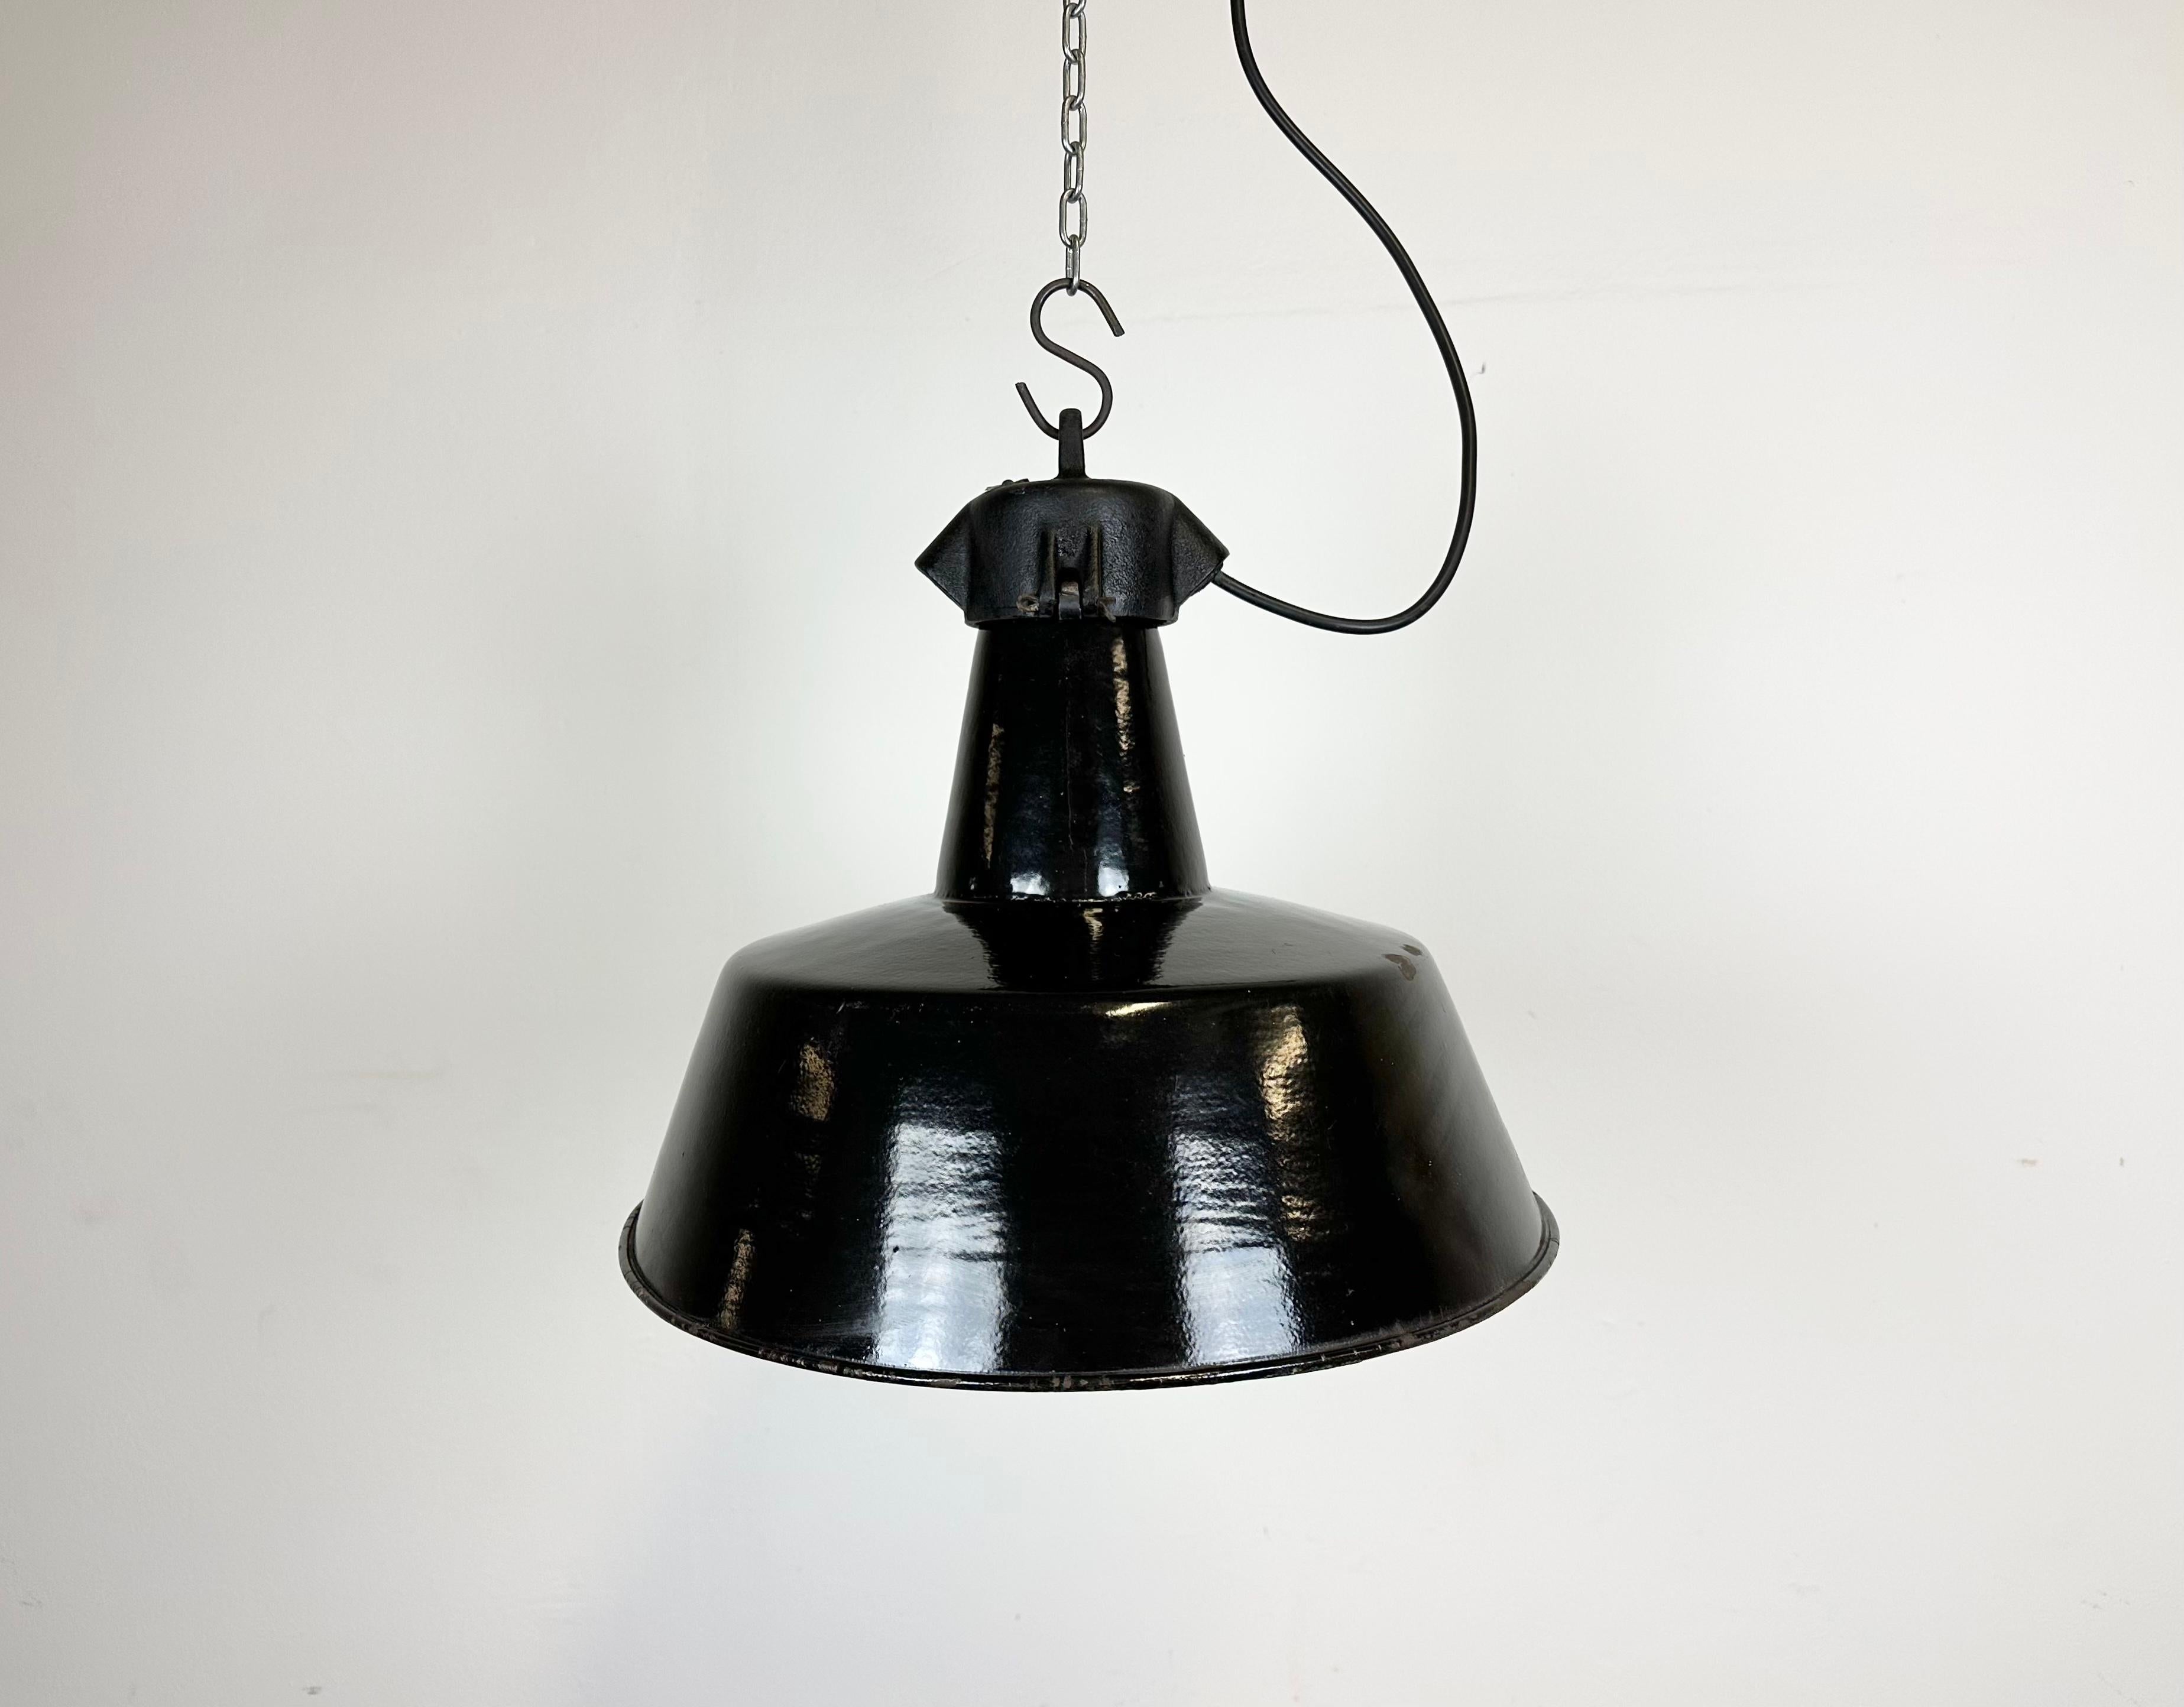 Industrial black enamel pendant light made in former Czechoslovakia during the 1960s. White enamel inside the shade. Cast iron top. The porcelain socket requires E 27/ E26 light bulbs. New wire. Fully functional. The weight of the lamp is 1,8 kg.